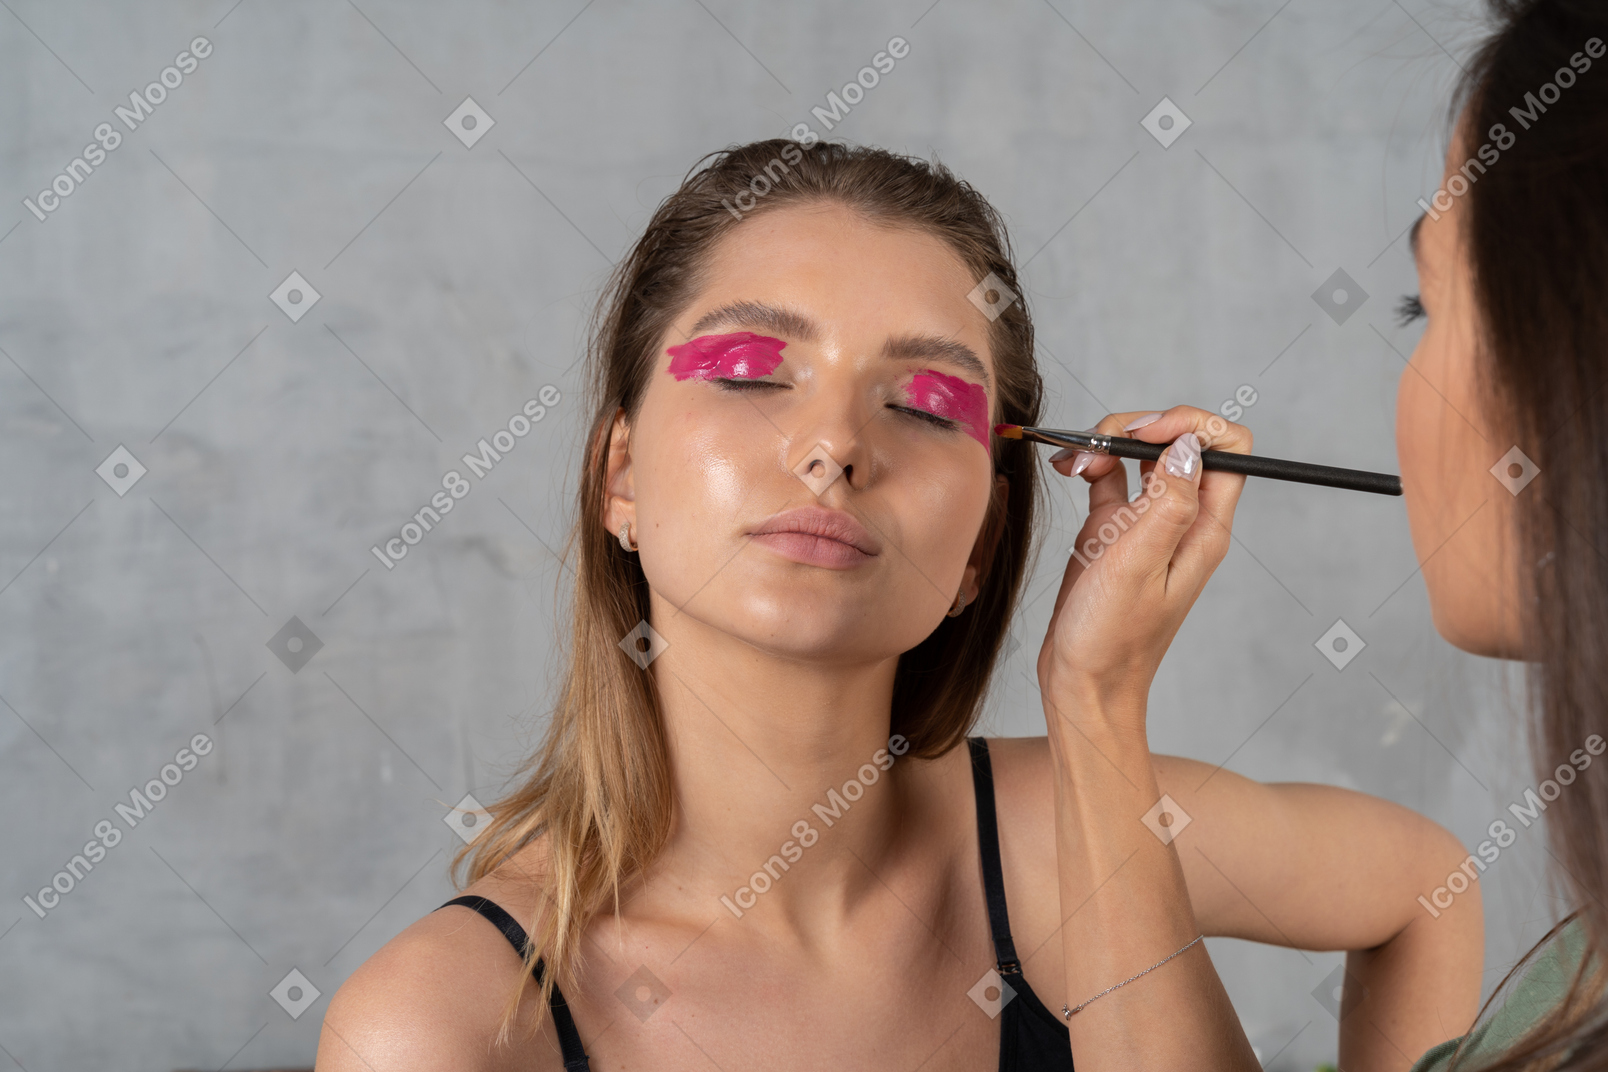 Portrait of a young woman with eyes closed waiting for her make-up to be finished